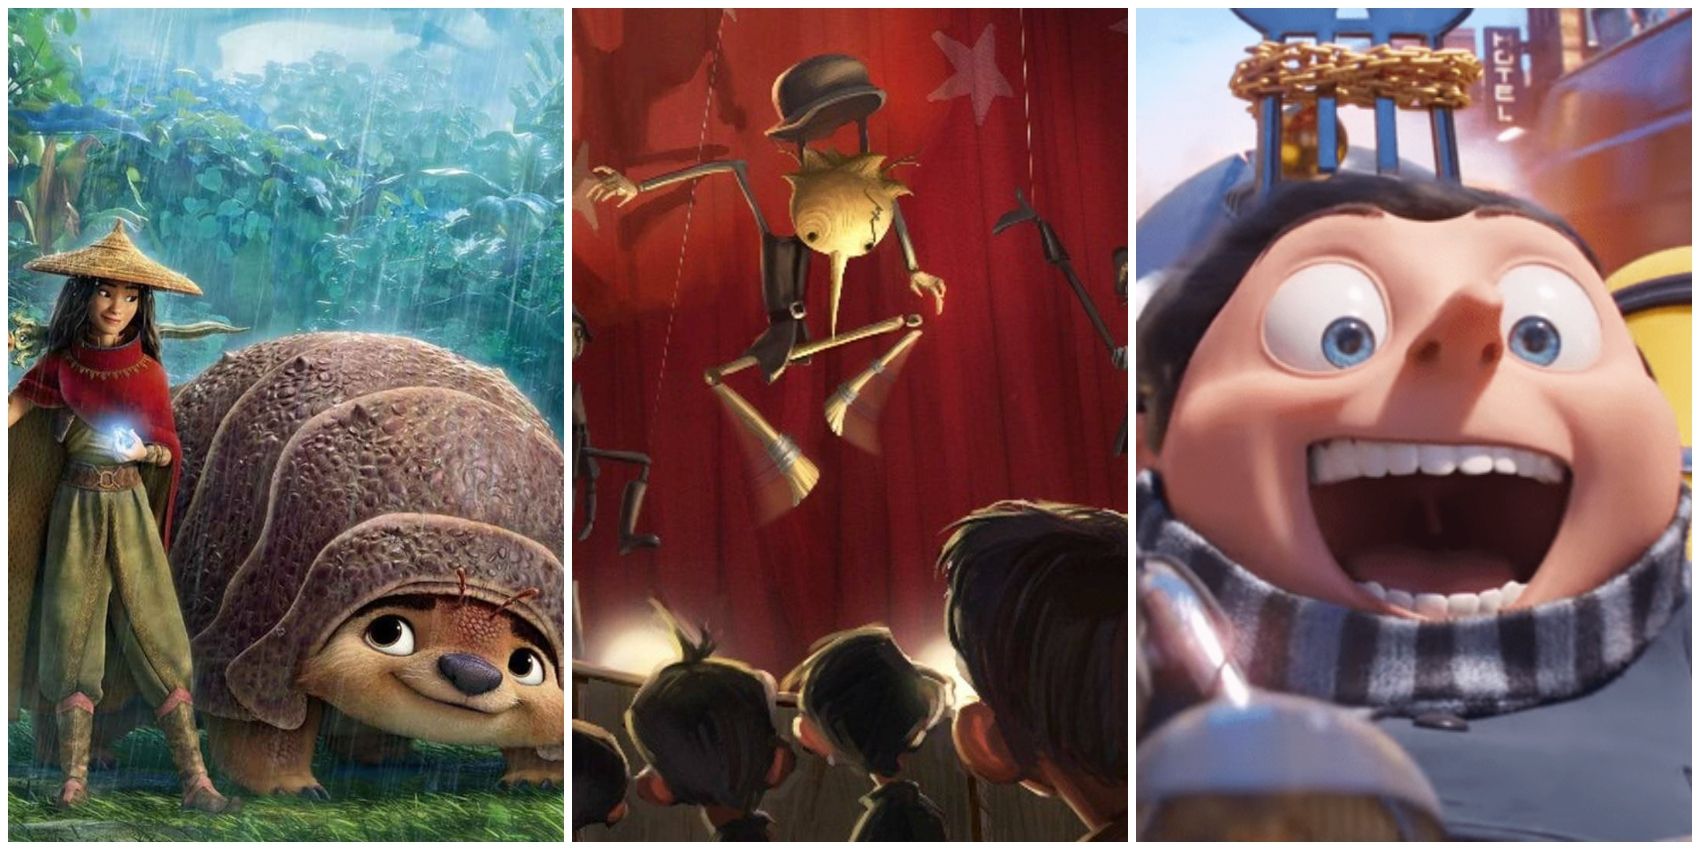 The 10 Most-Anticipated Animated Movies Of 2021 (According To Their